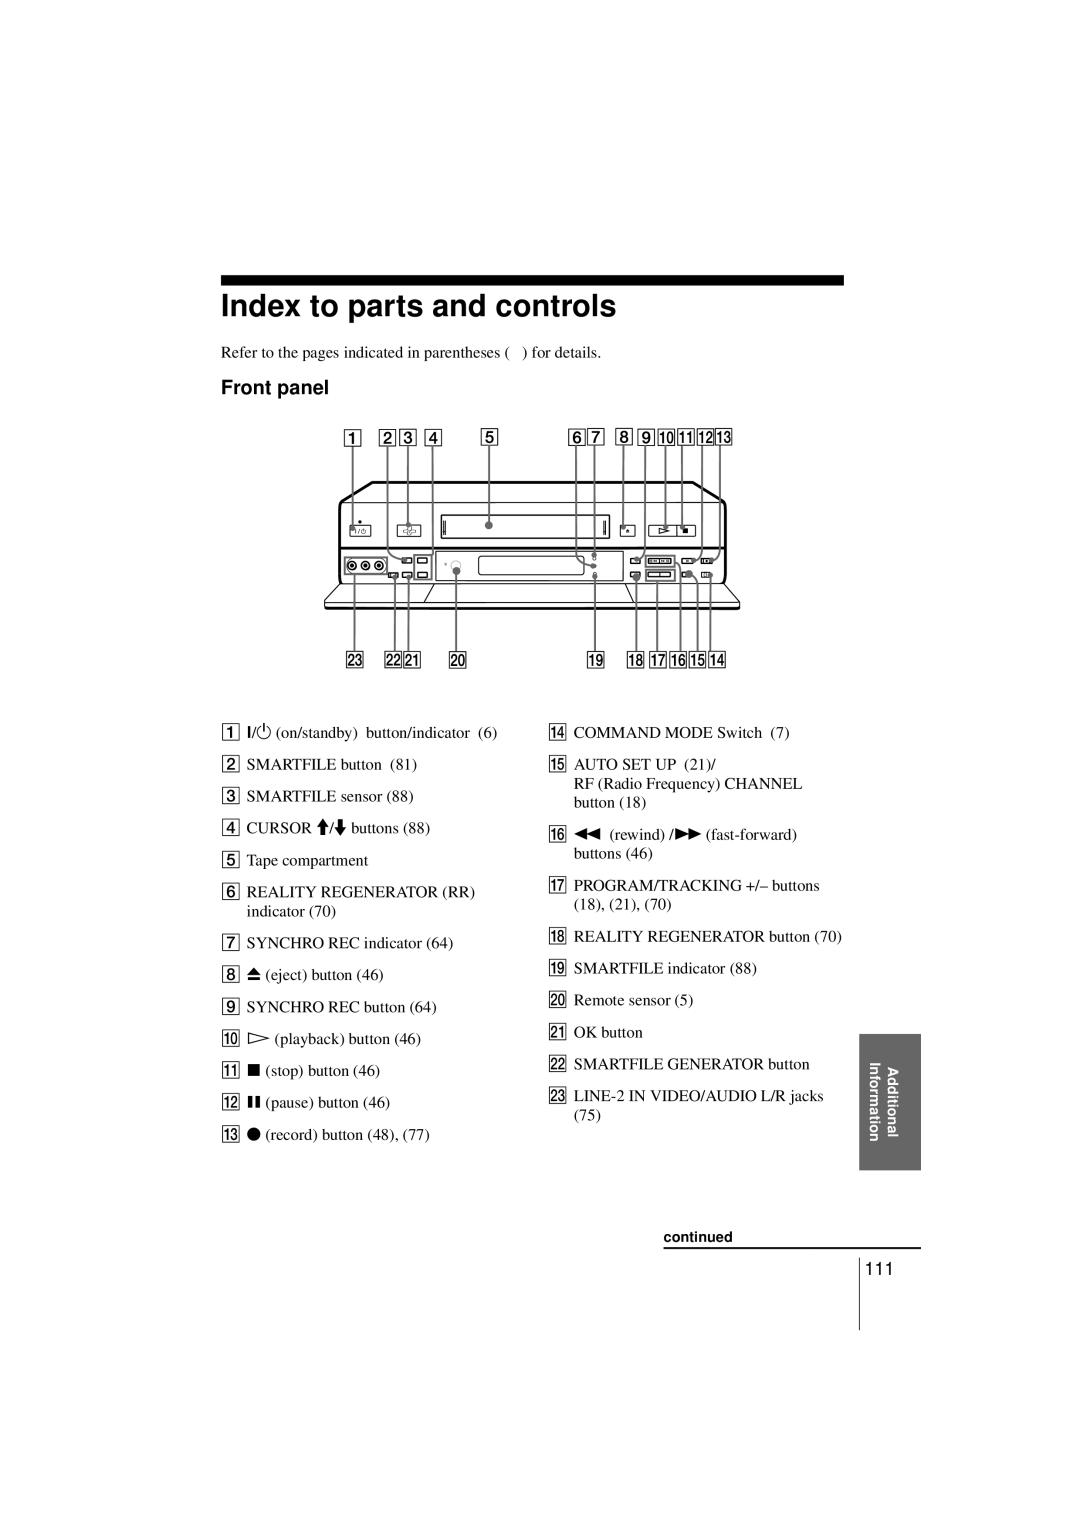 Sony SLV-SF990G manual Index to parts and controls, Front panel 